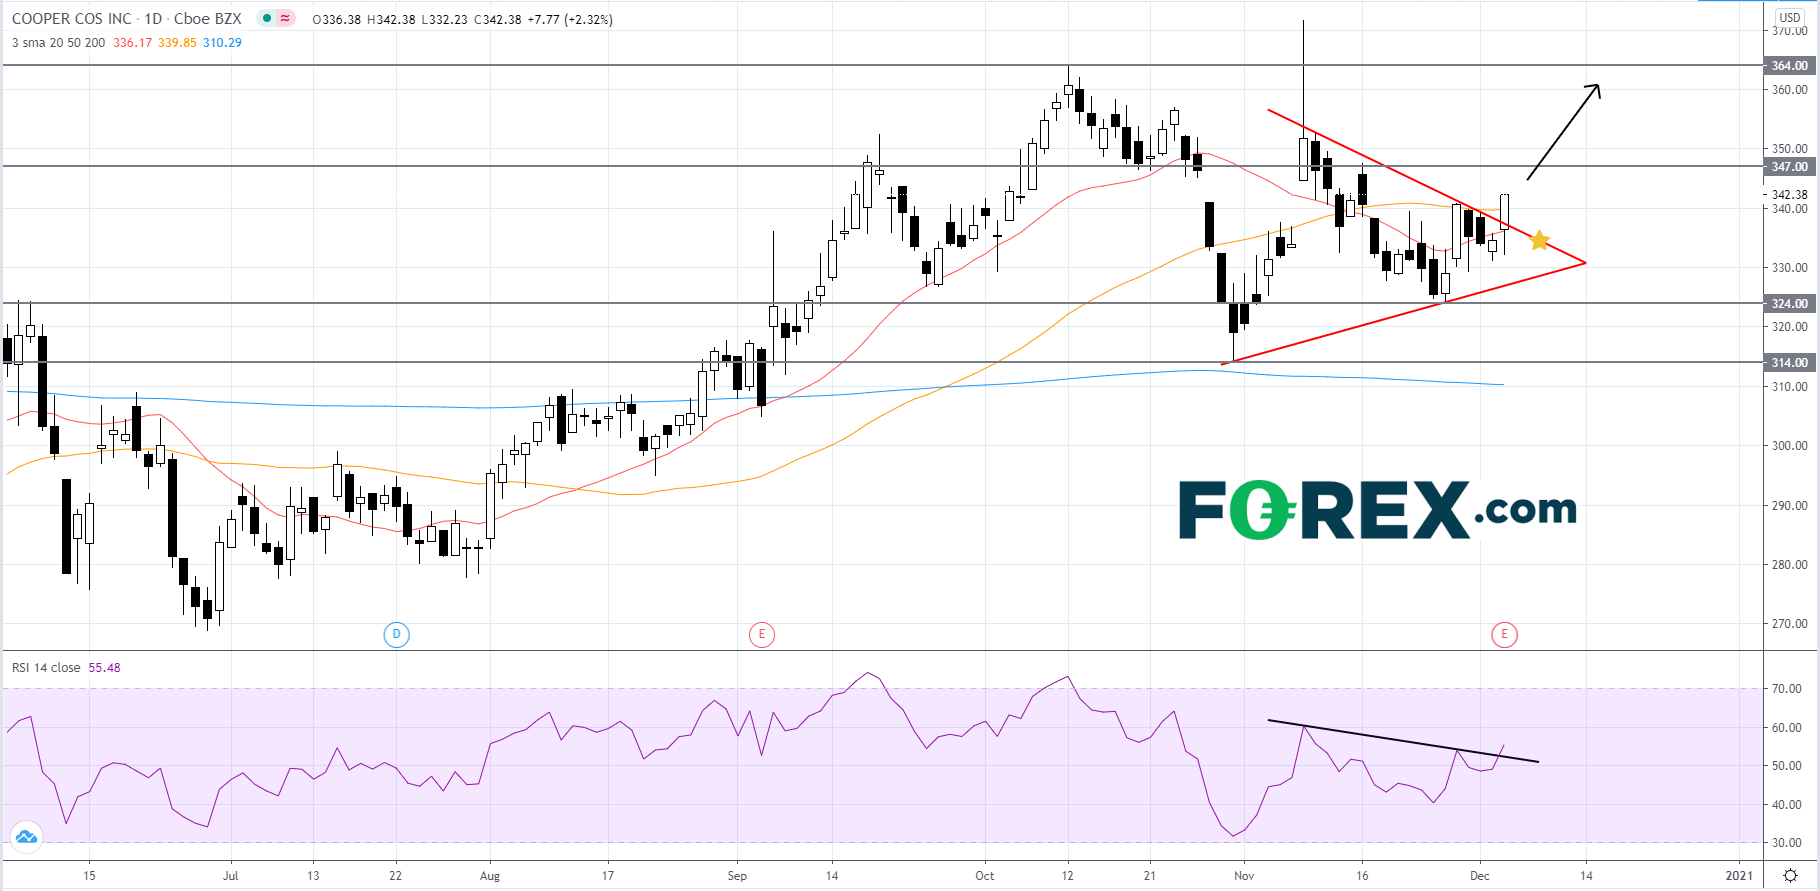 Chart analysis of Cooper COS INC. Published in December 2020 by FOREX.com